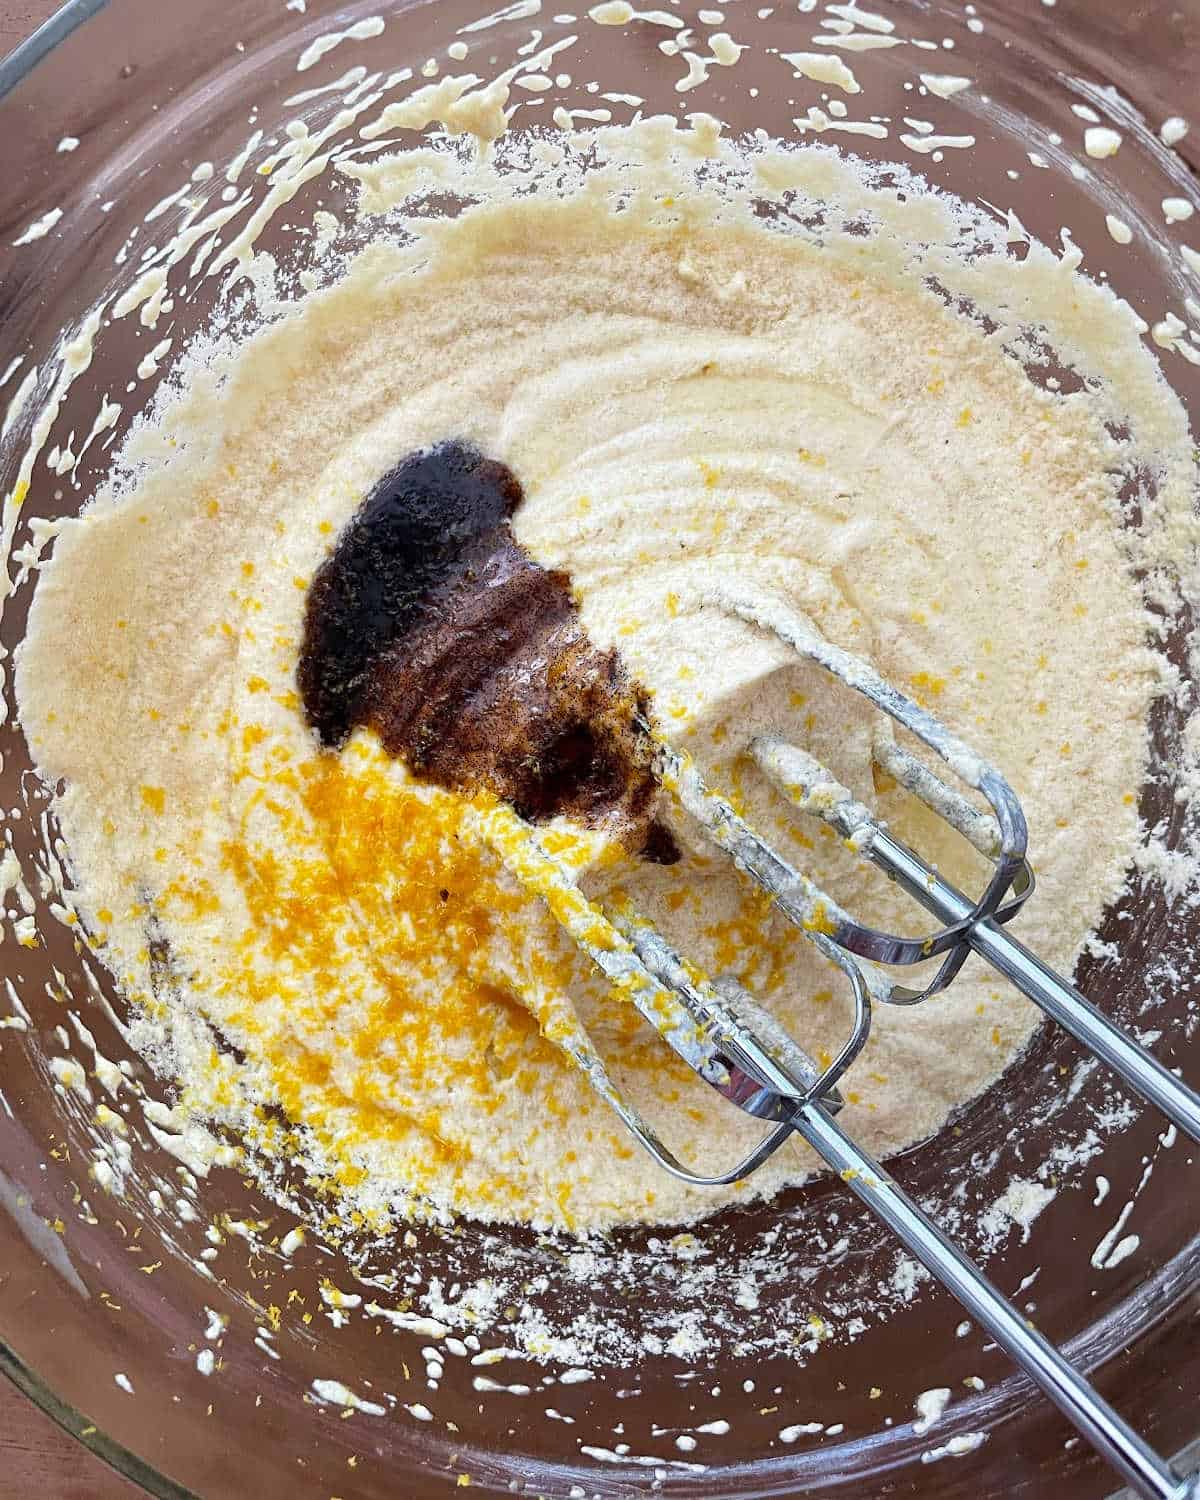 Vanilla and zest added to cake batter in a glass bowl on a wooden surface. 